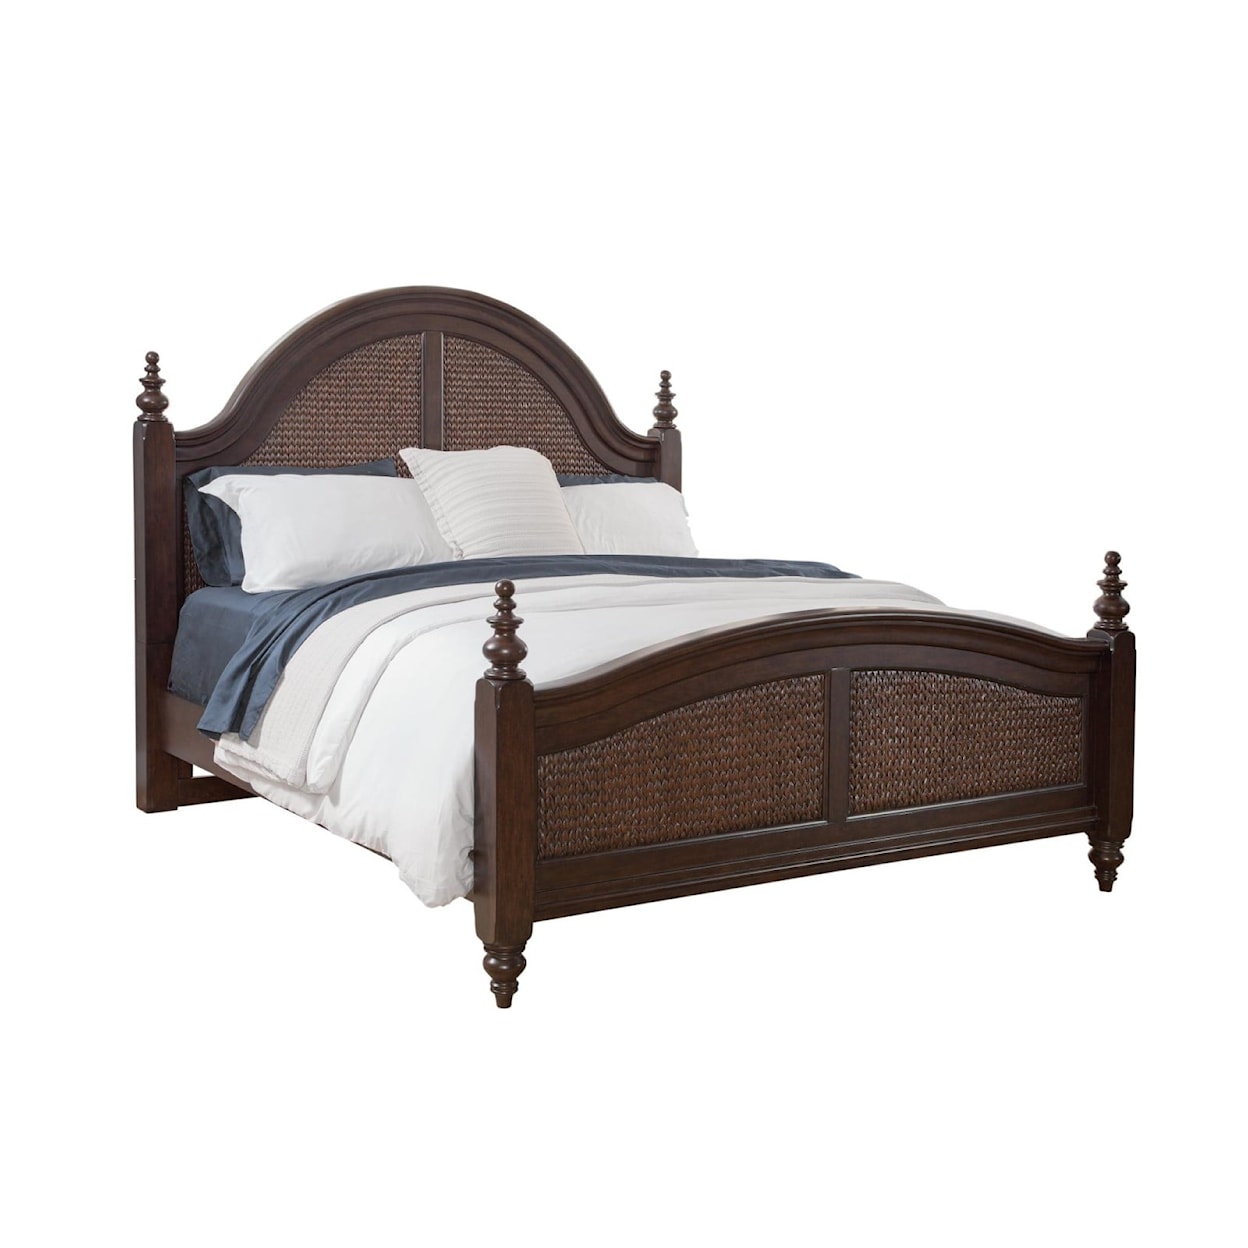 American Woodcrafters Rodanthe King Woven Bed